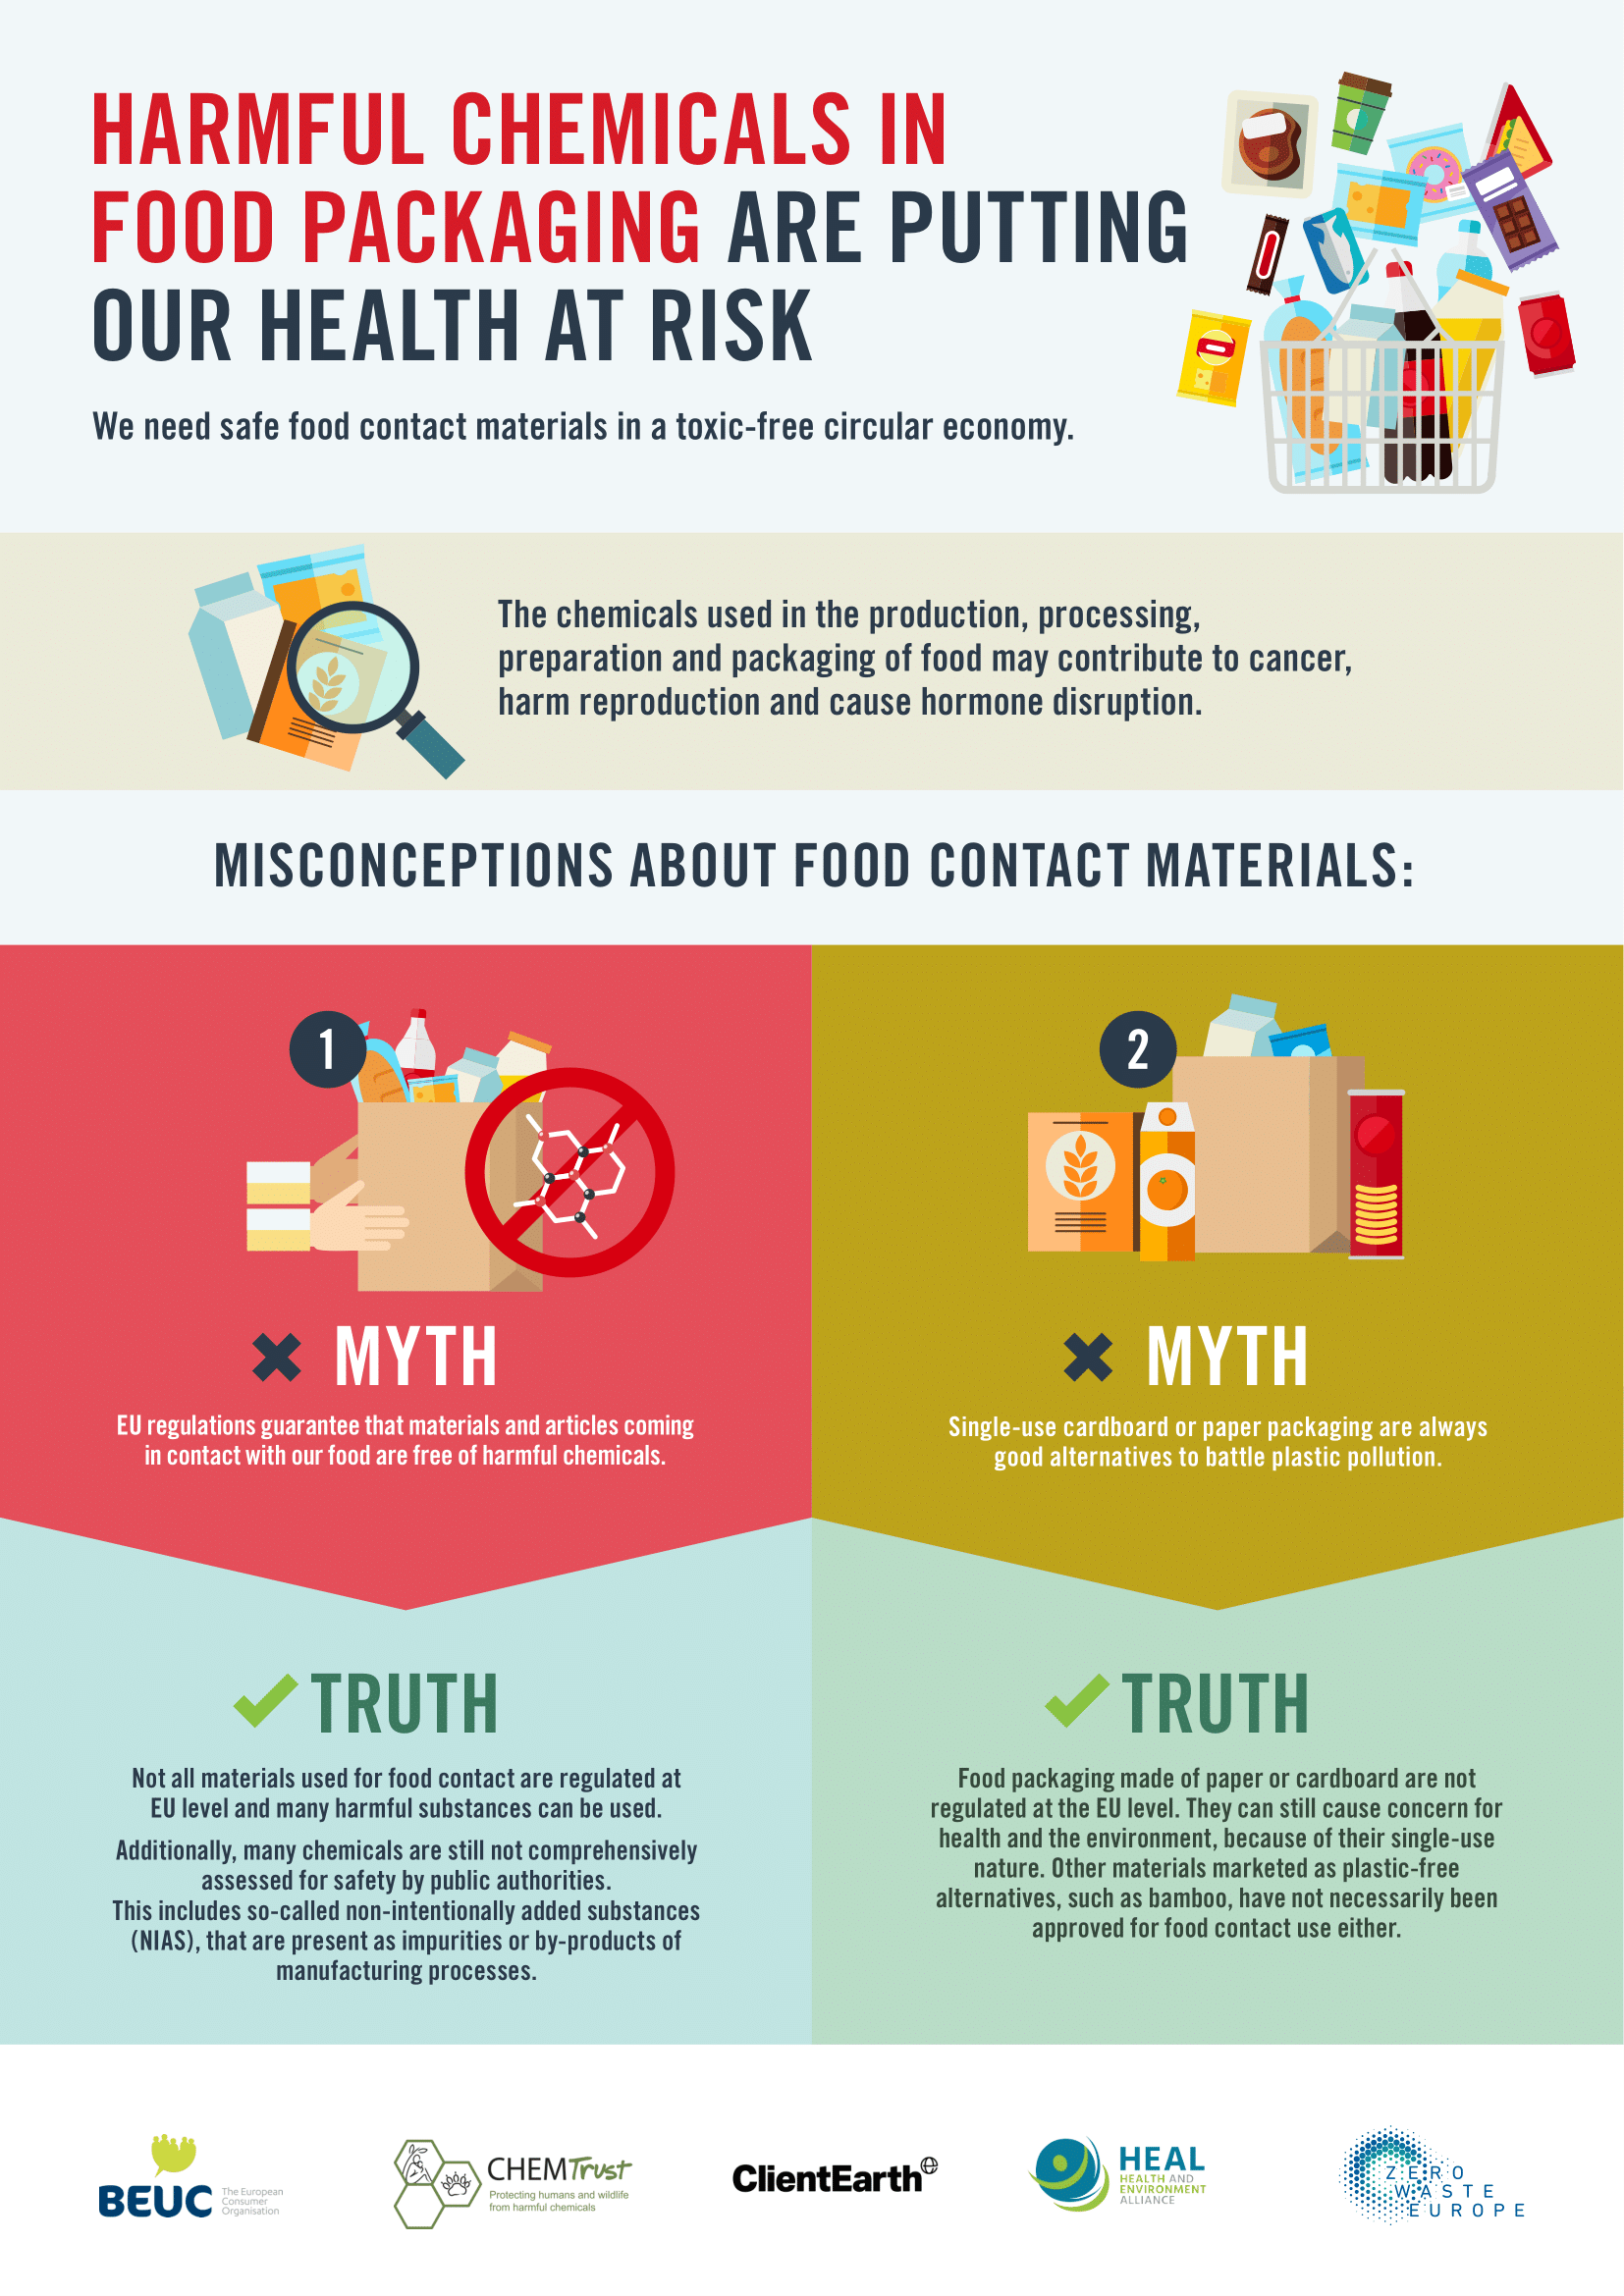 Harmful chemicals in food packaging are putting our health at risk